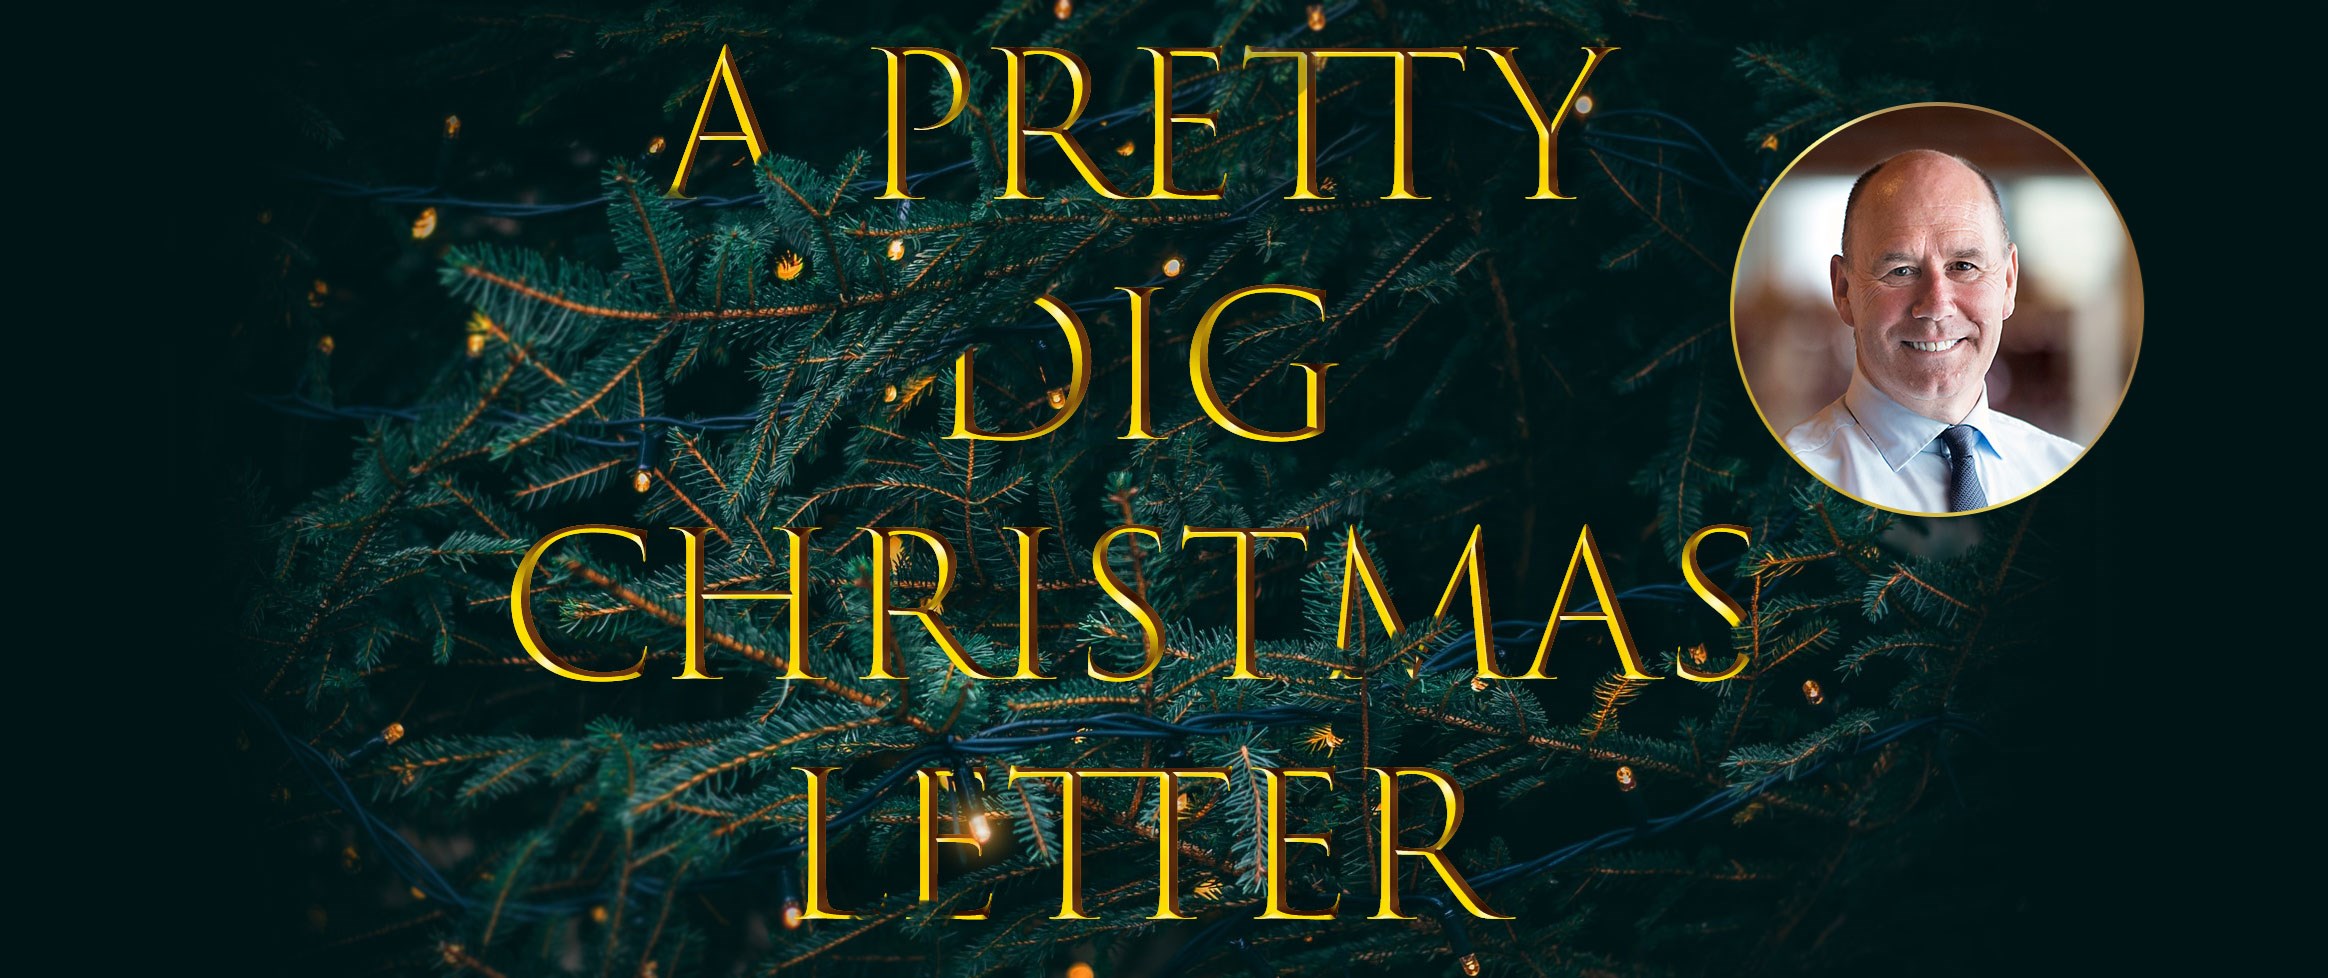 A christmas tree with the text "A pretty DIG christmas letter"